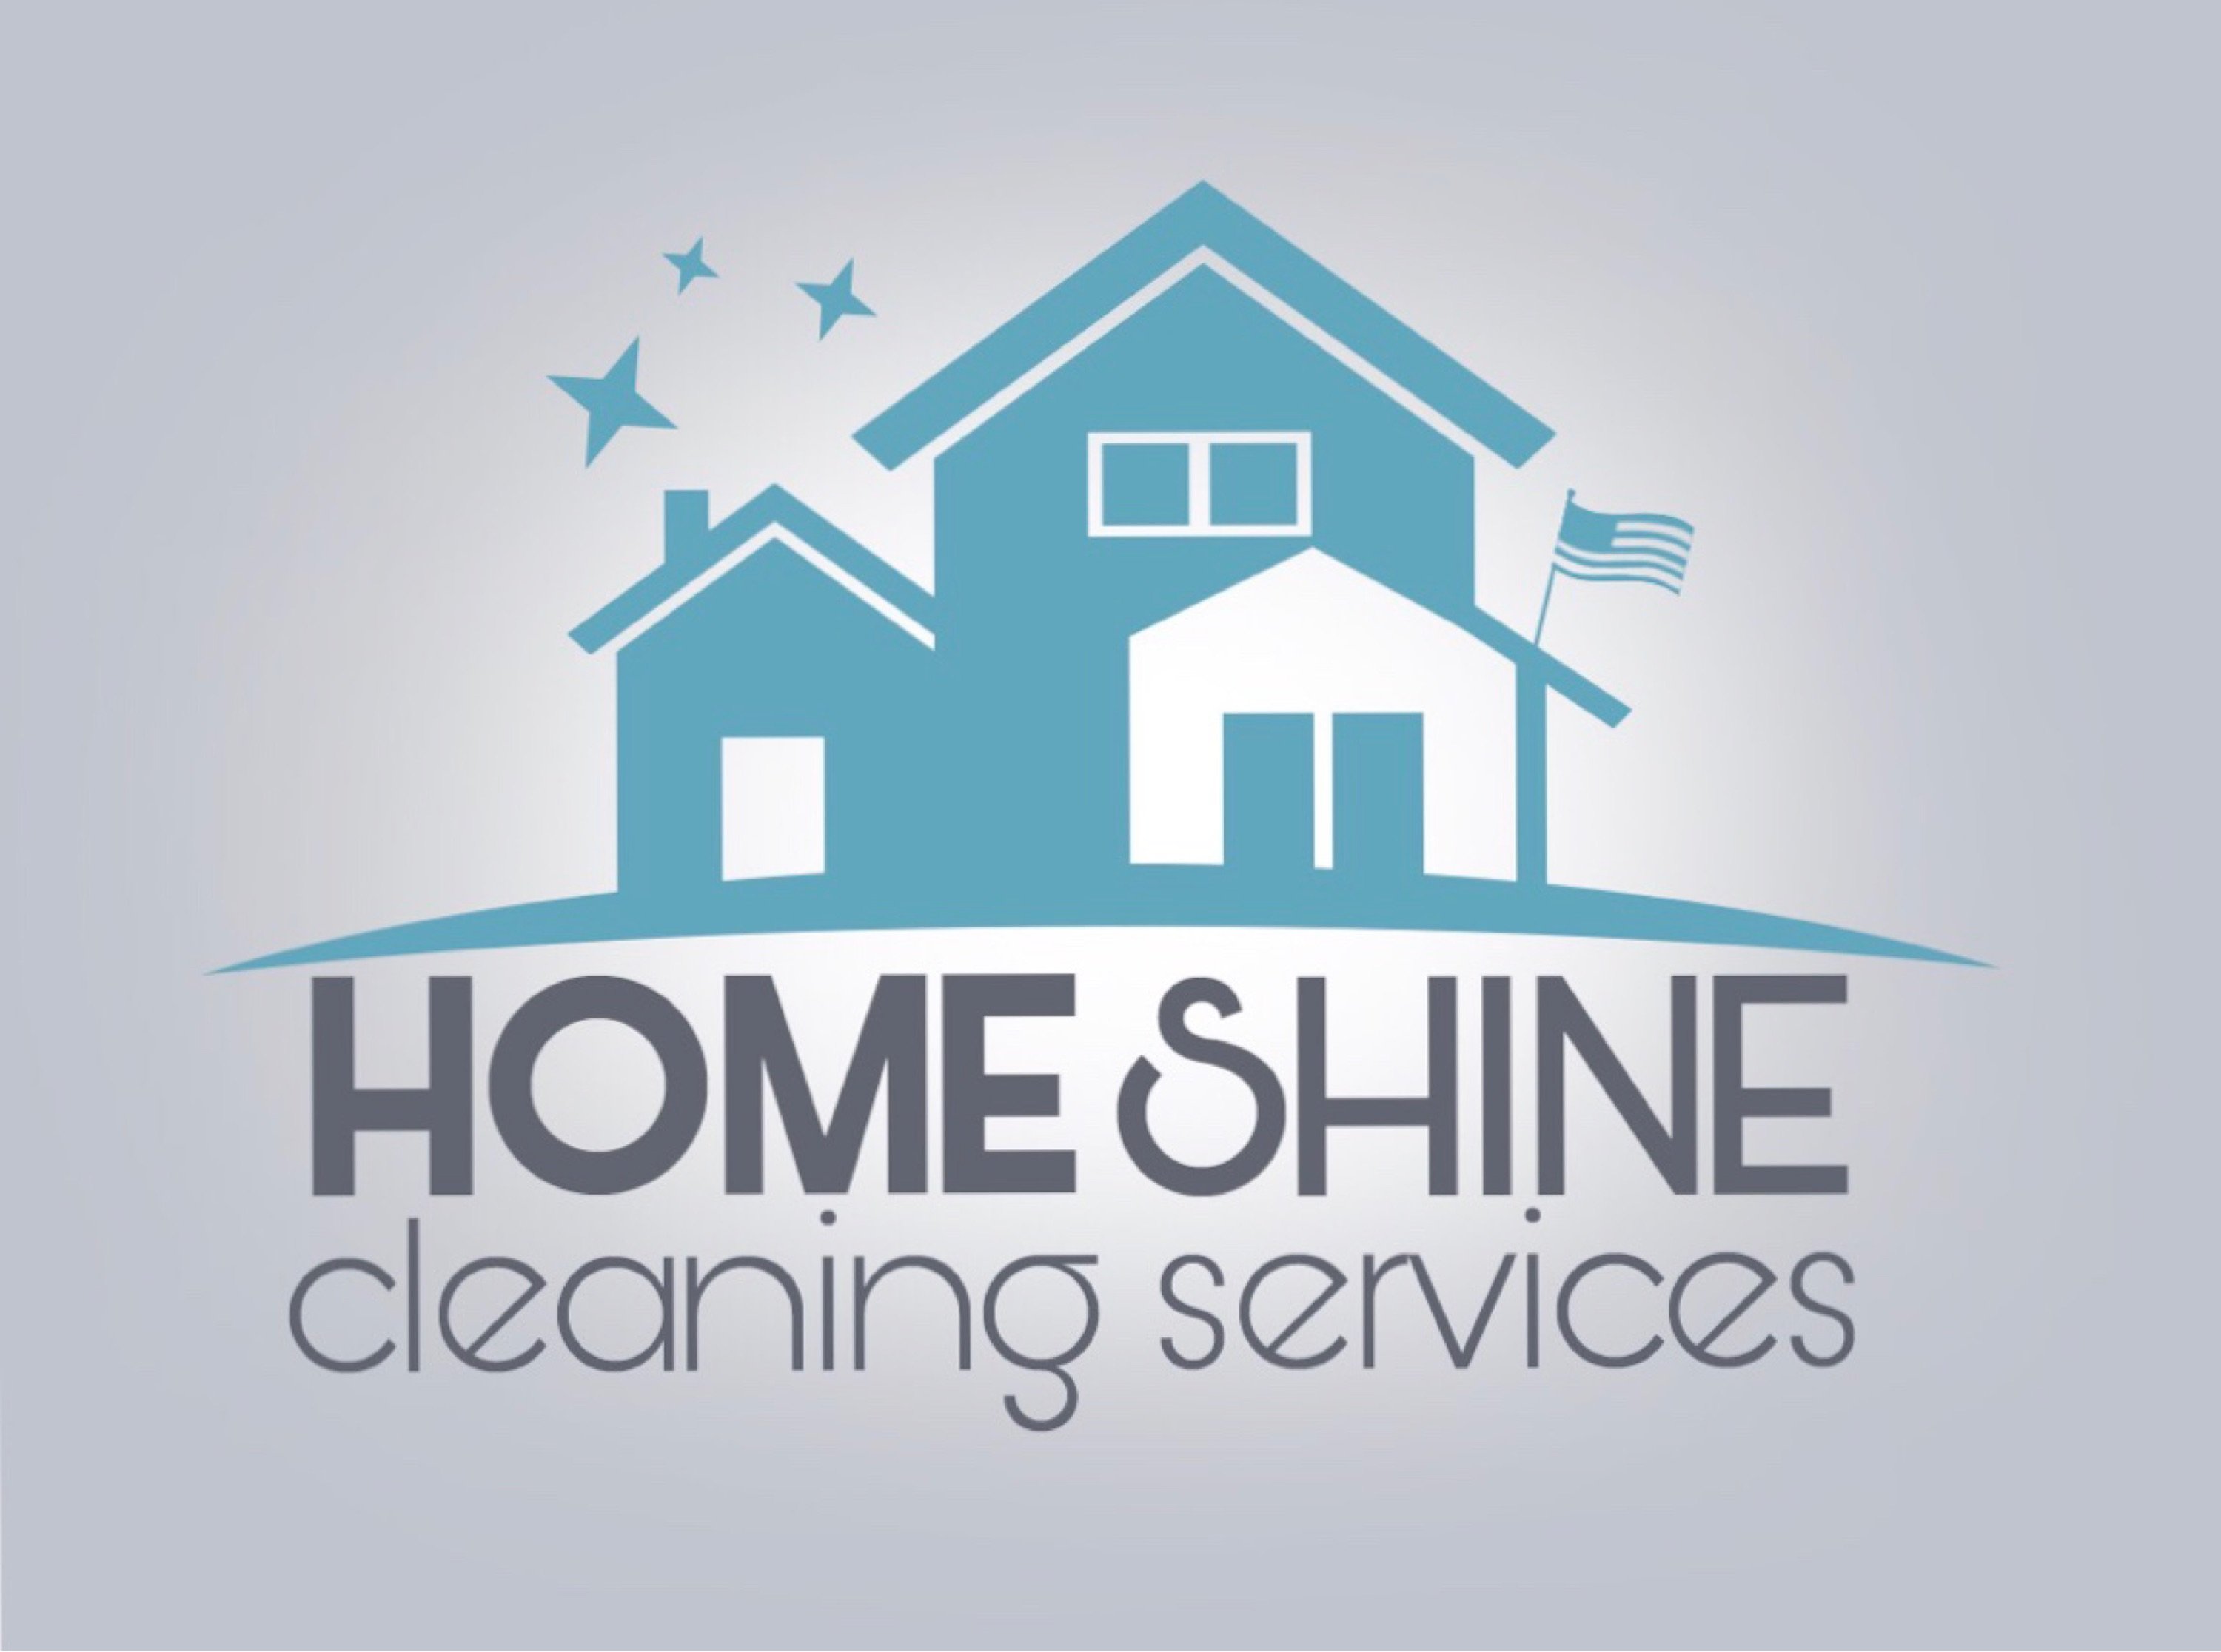 Home Shine Cleaning Services, LLC Logo